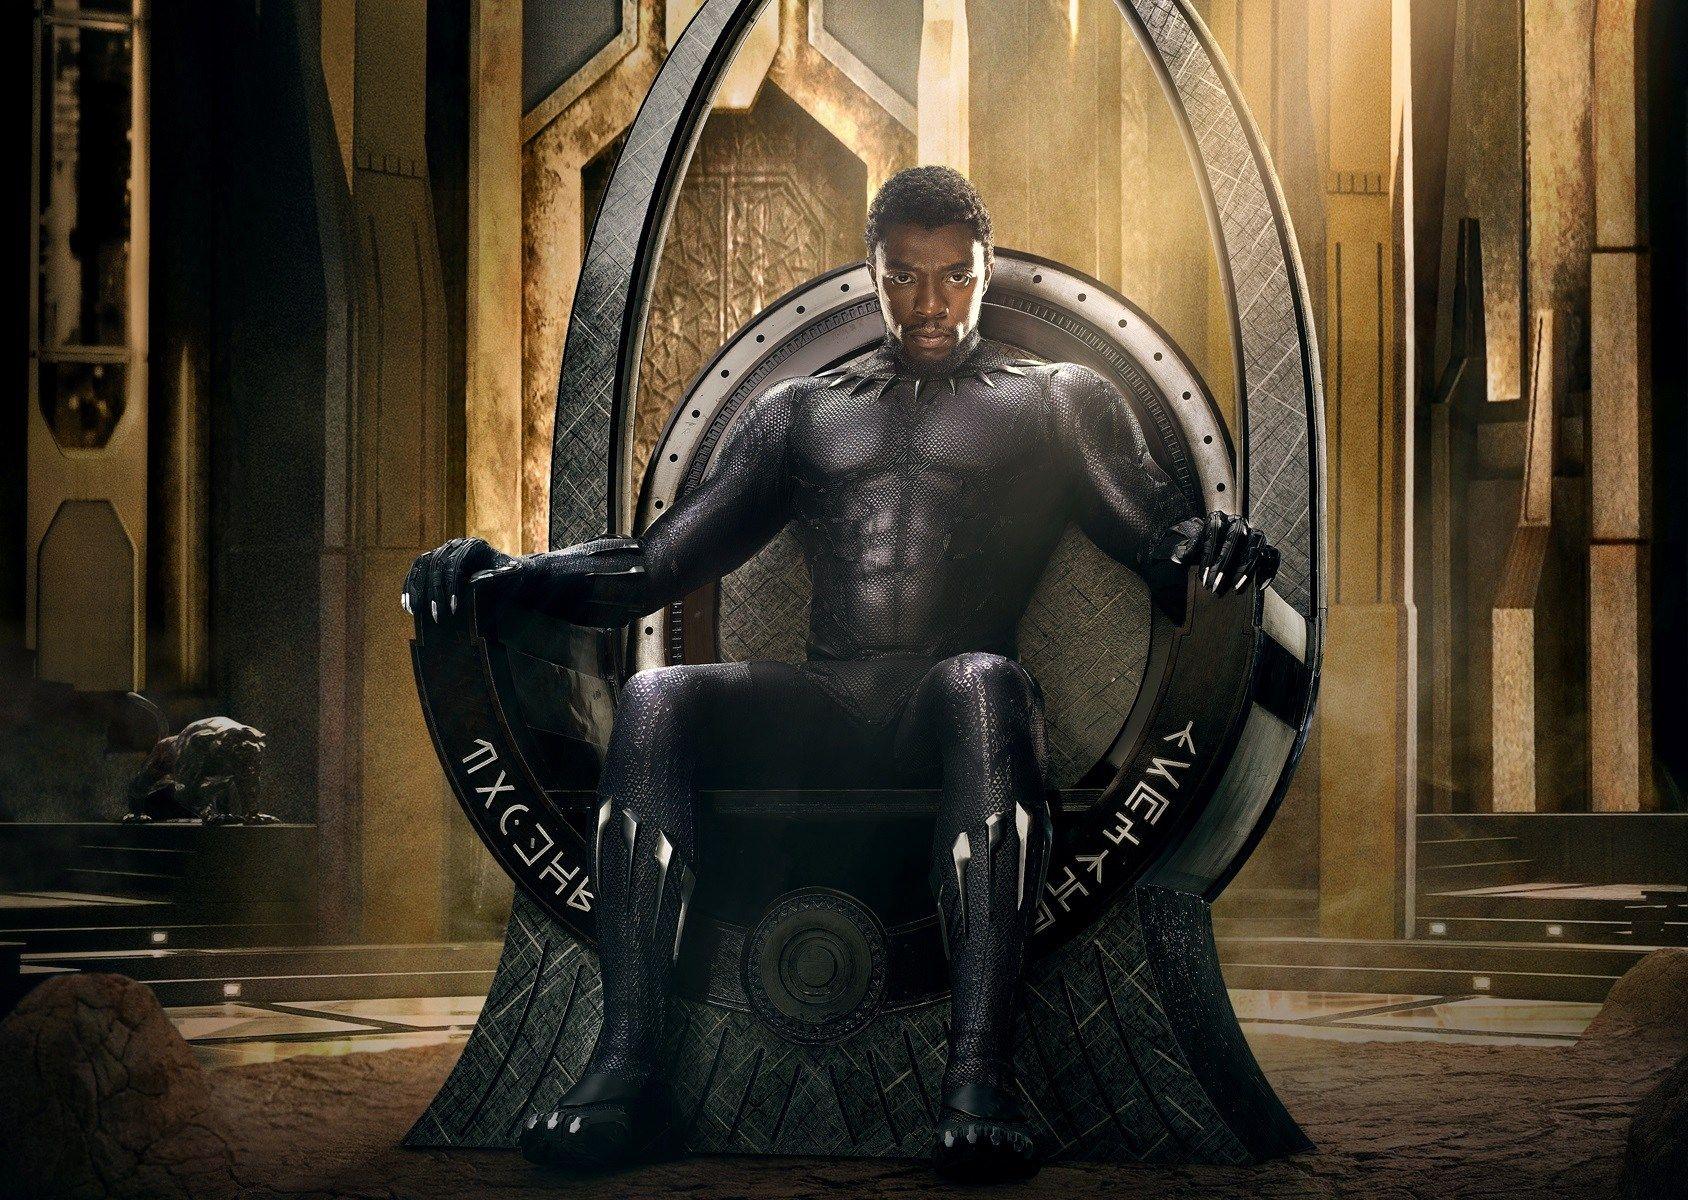 Black Panther Movie Computer Wallpaper 62056 1688x1200 px